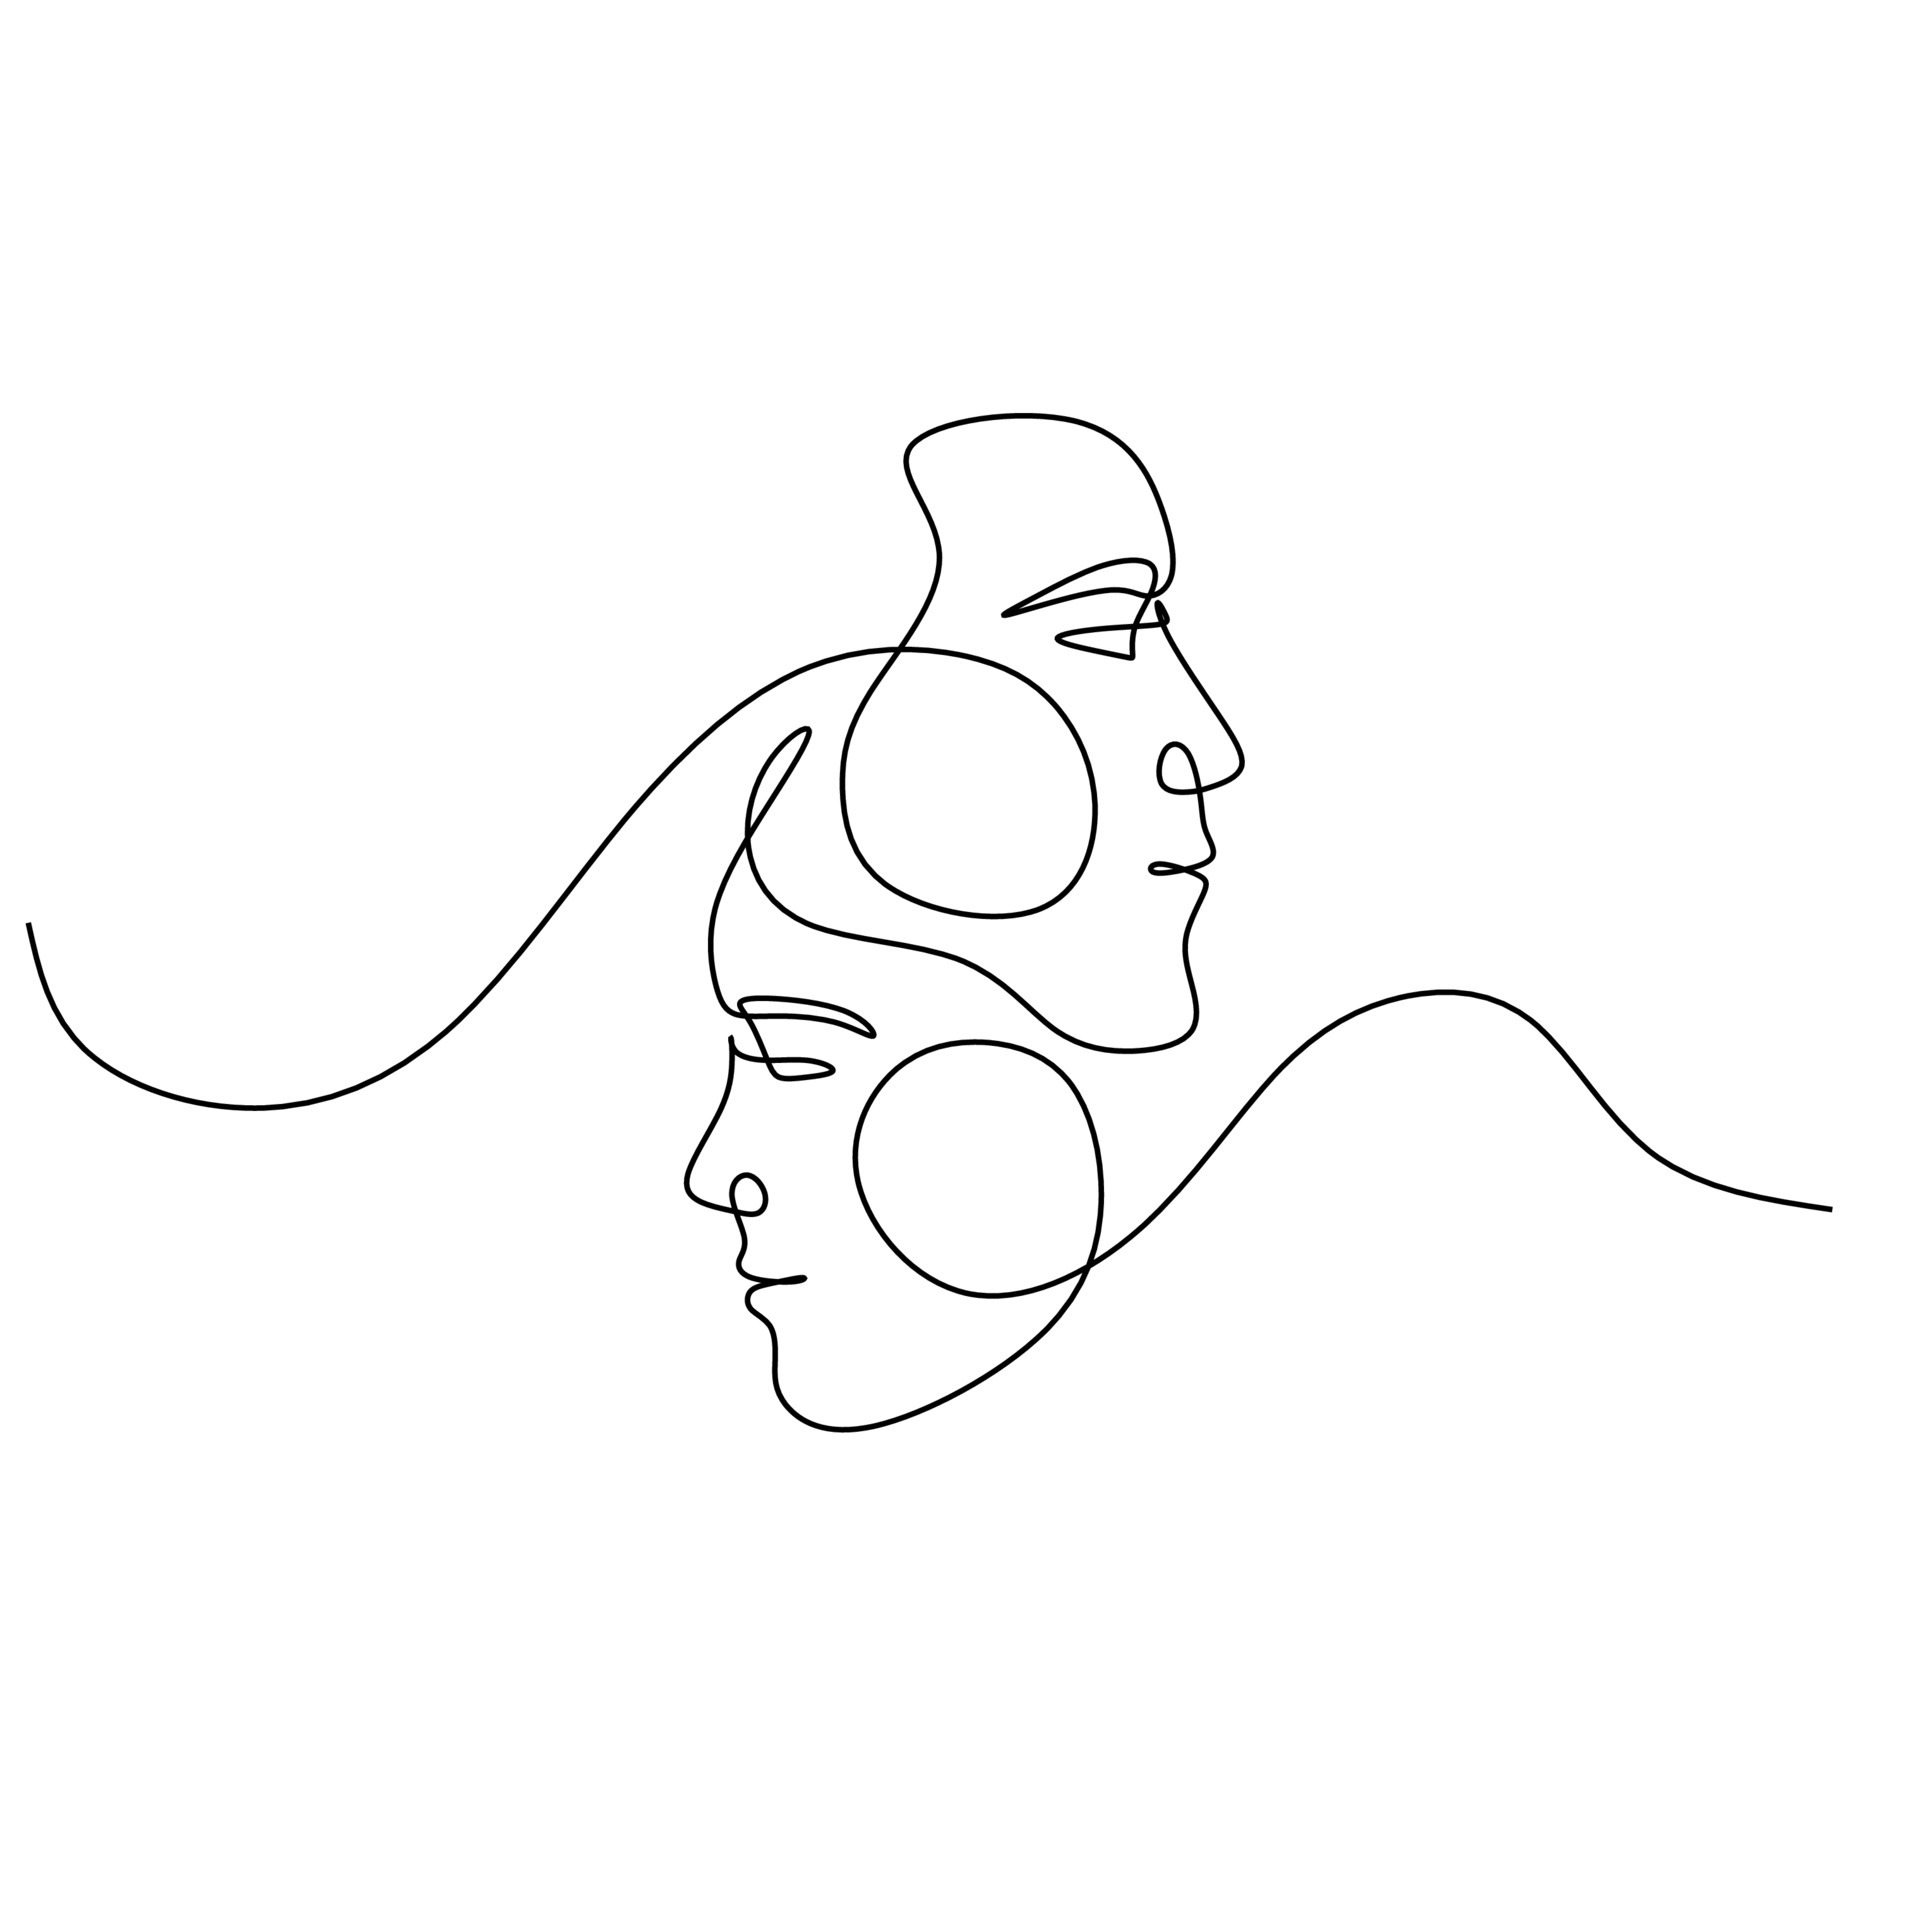 https://static.vecteezy.com/system/resources/previews/004/662/661/original/one-line-art-couple-line-art-men-and-woman-minimal-face-couple-print-kiss-print-valentines-day-illustration-love-poster-2-faces-we-are-one-line-vector.jpg